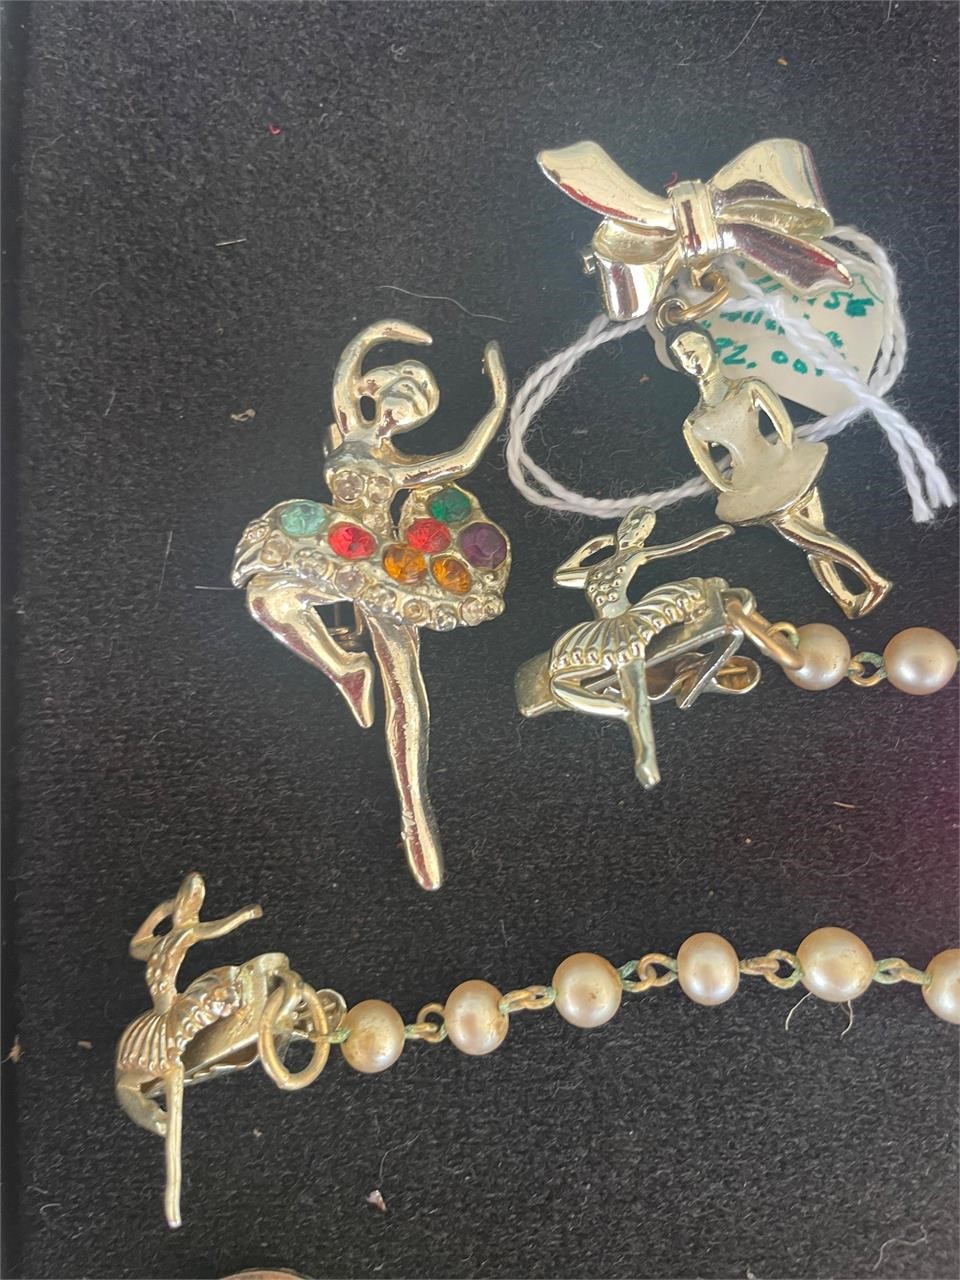 Spring Jewelry Auction